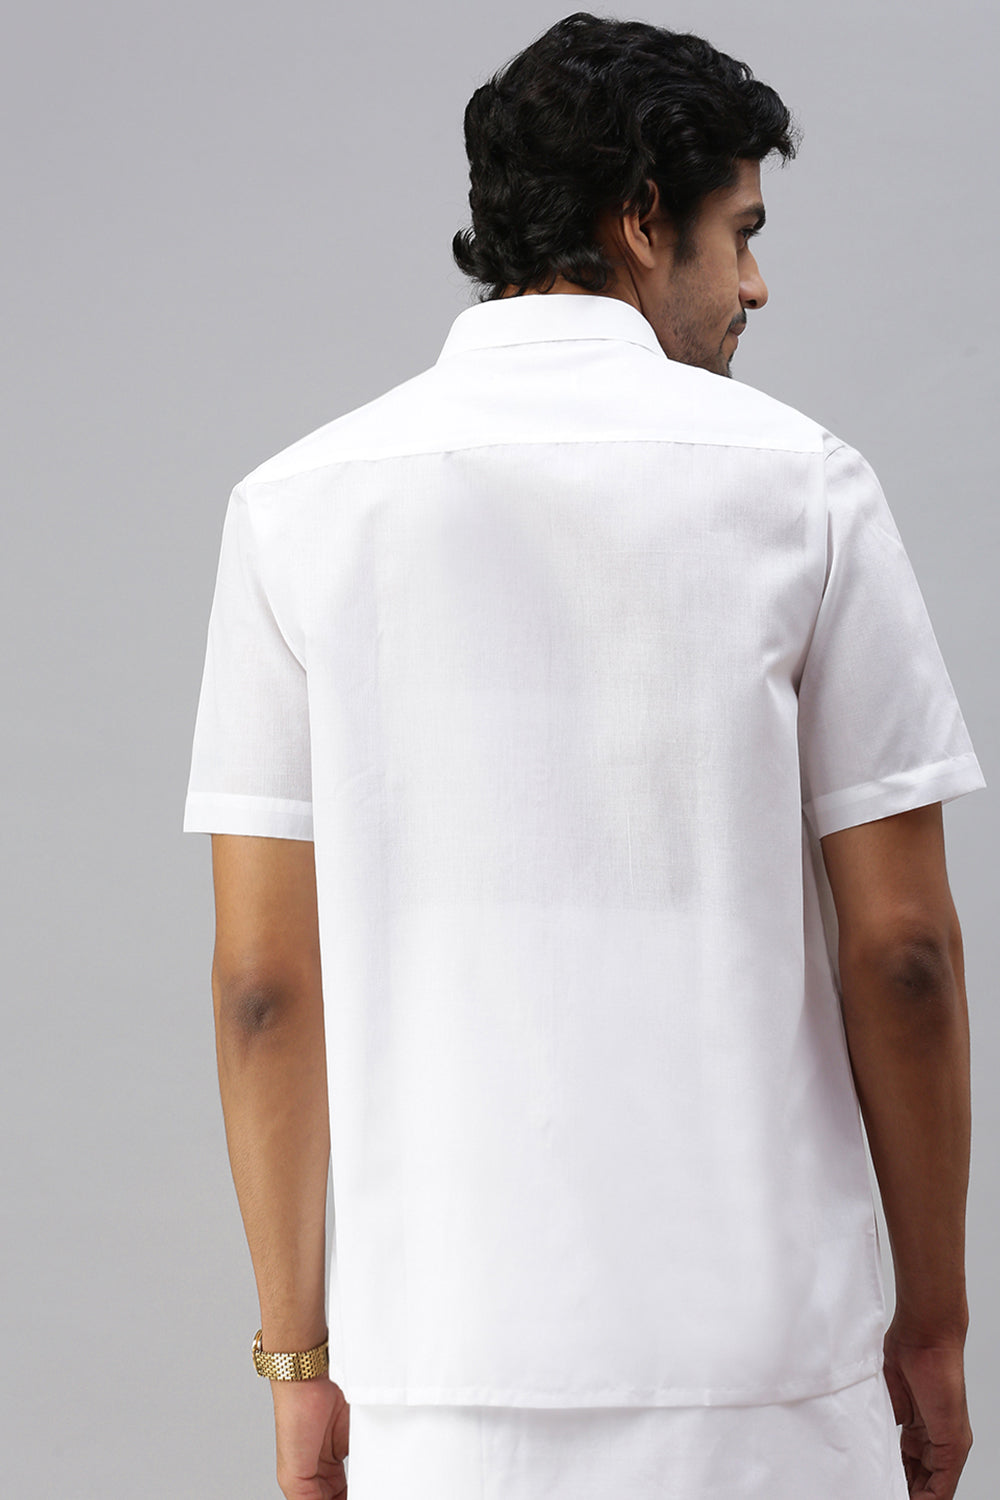 Mens Poly Cotton Half Sleeves White Shirt Expert -Back view